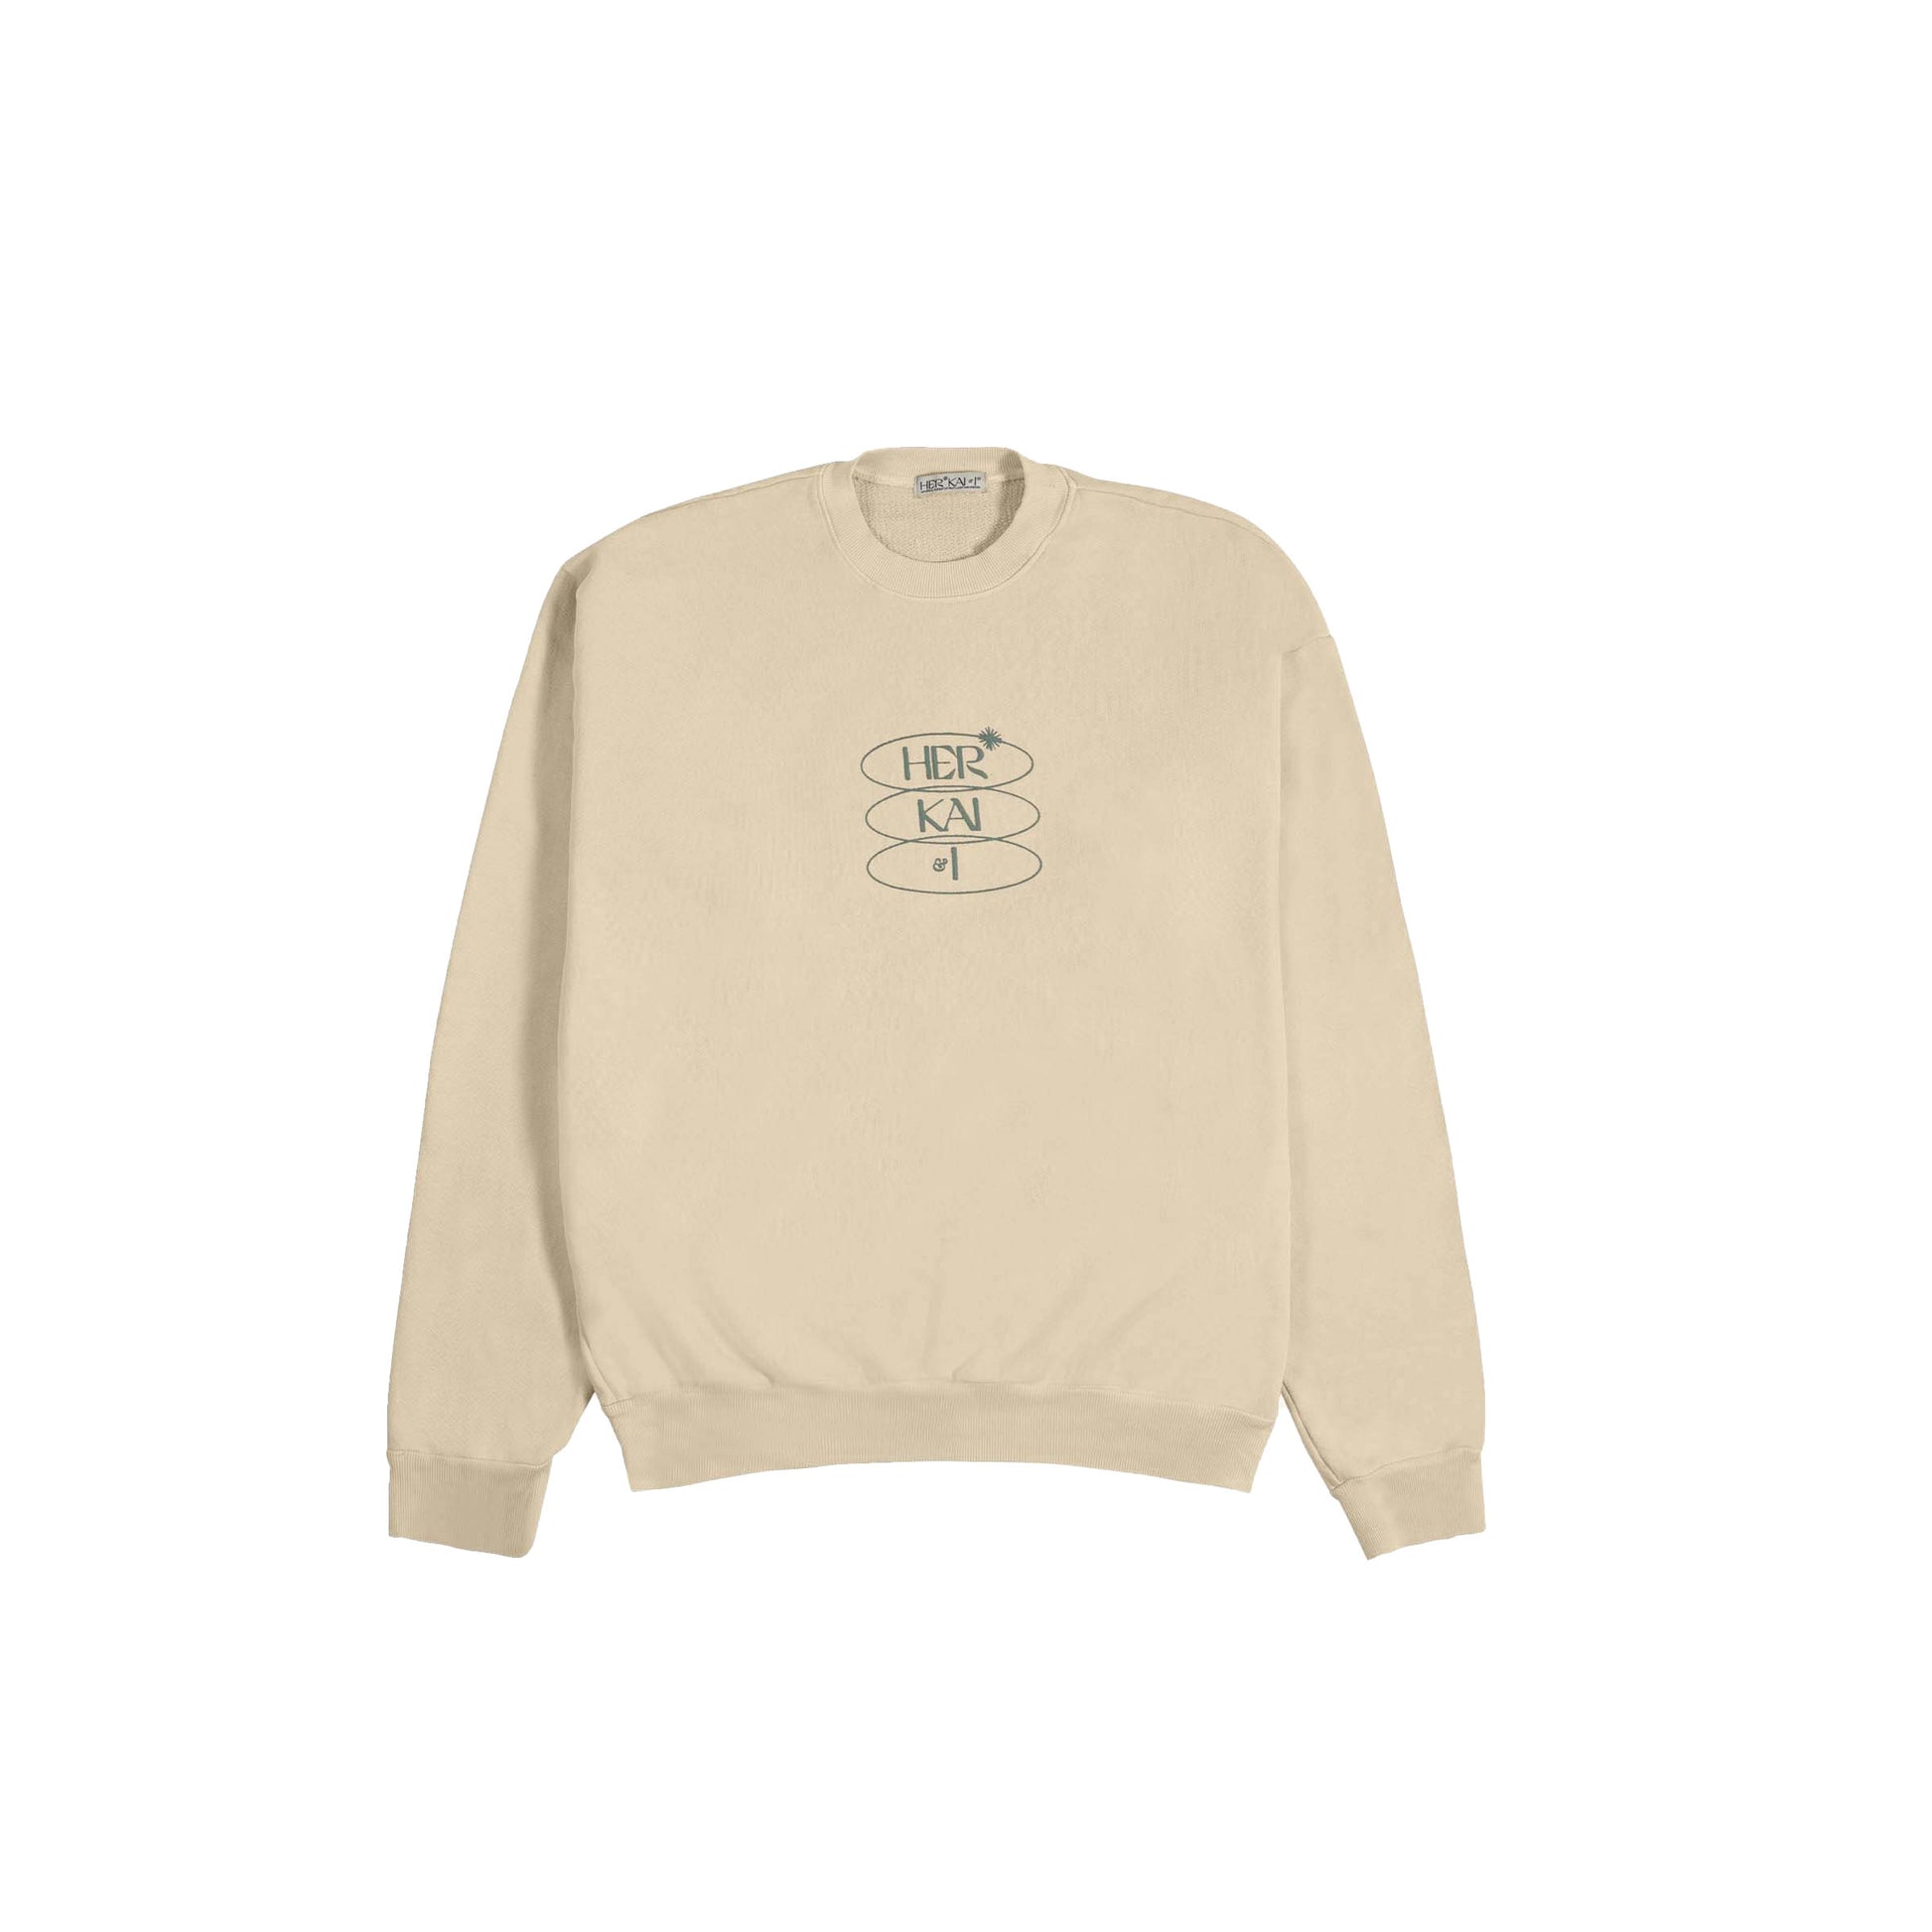 Boundless in Divinity Crewneck Sweatshirt by Her Kai & I in Cream (our signature color OUT OF MY SHELL)